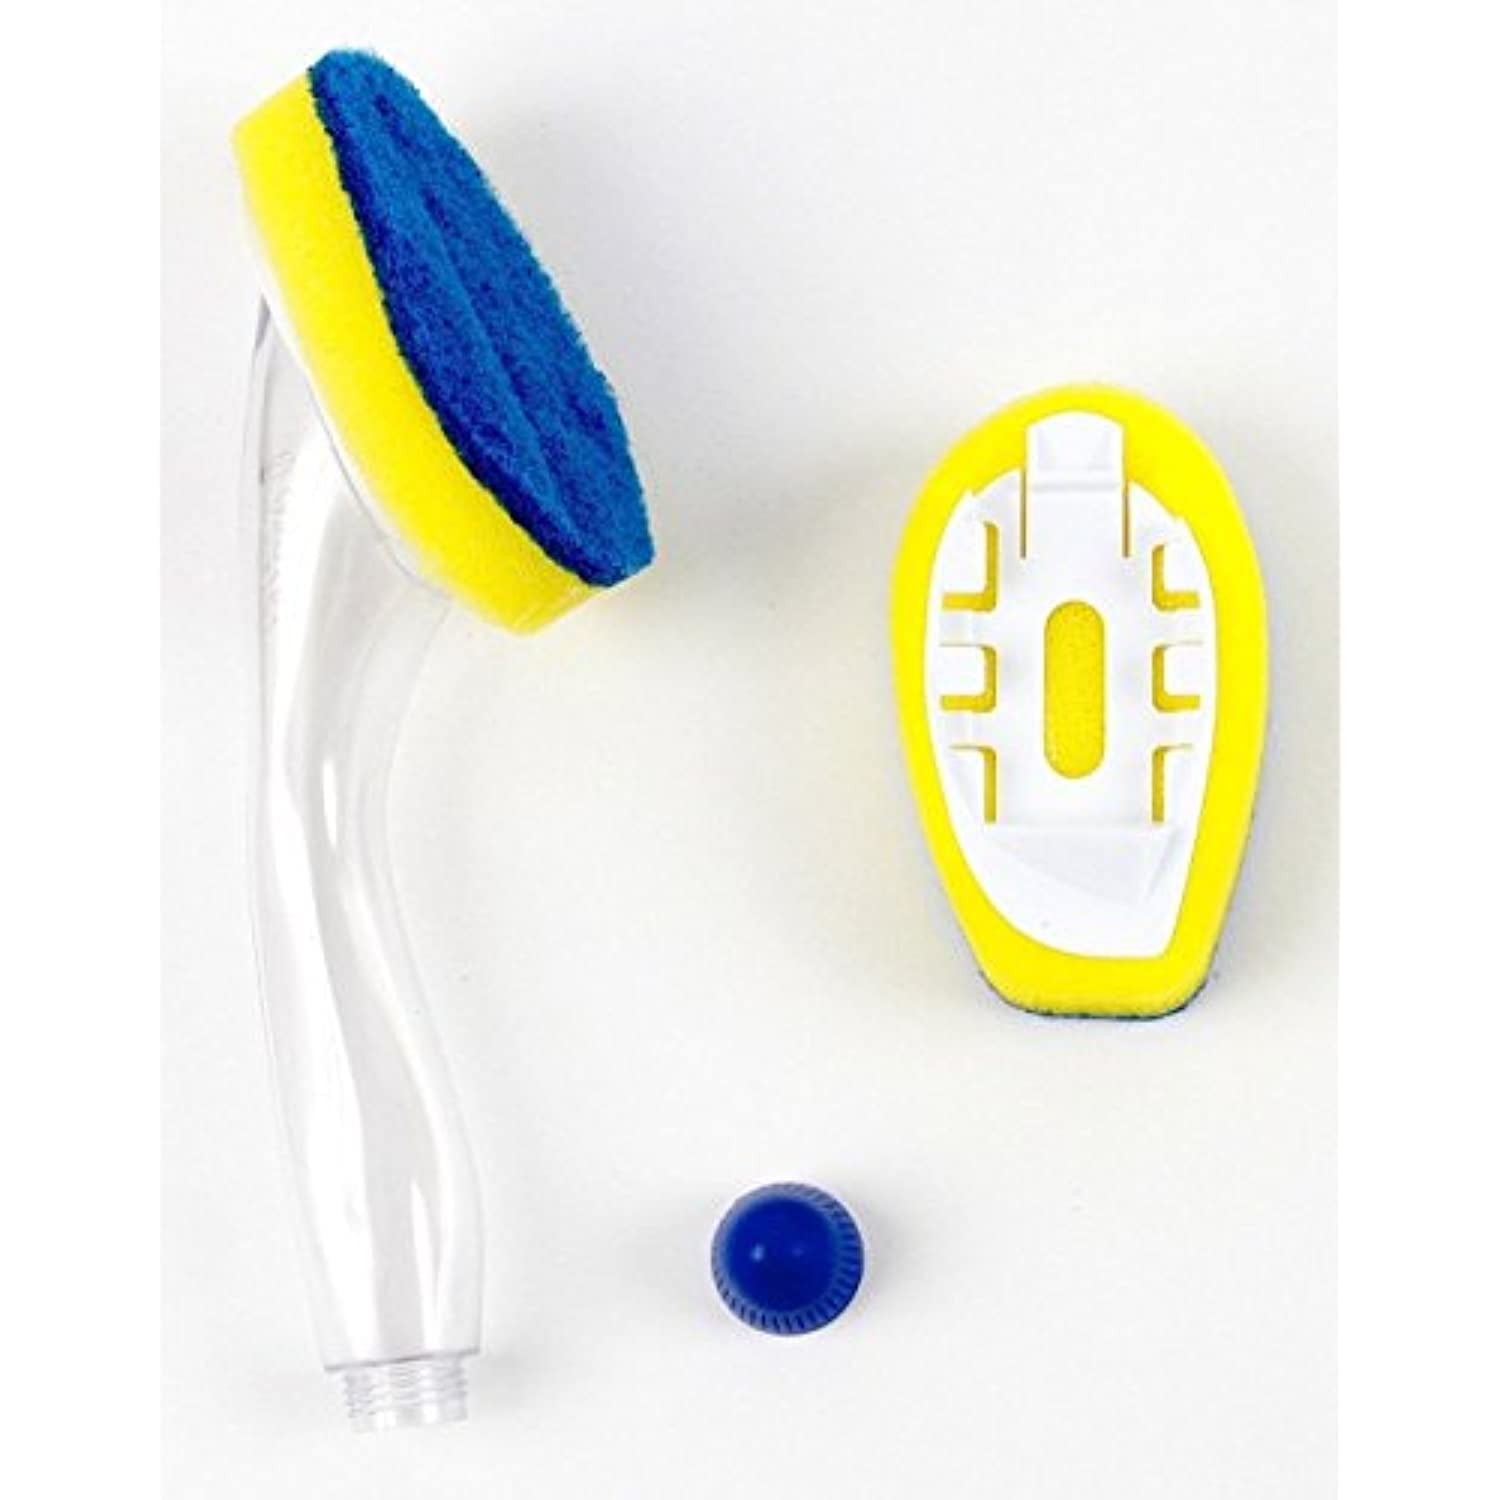 Simply Done Non-Scratch Fillable Dish Wand Scrubber